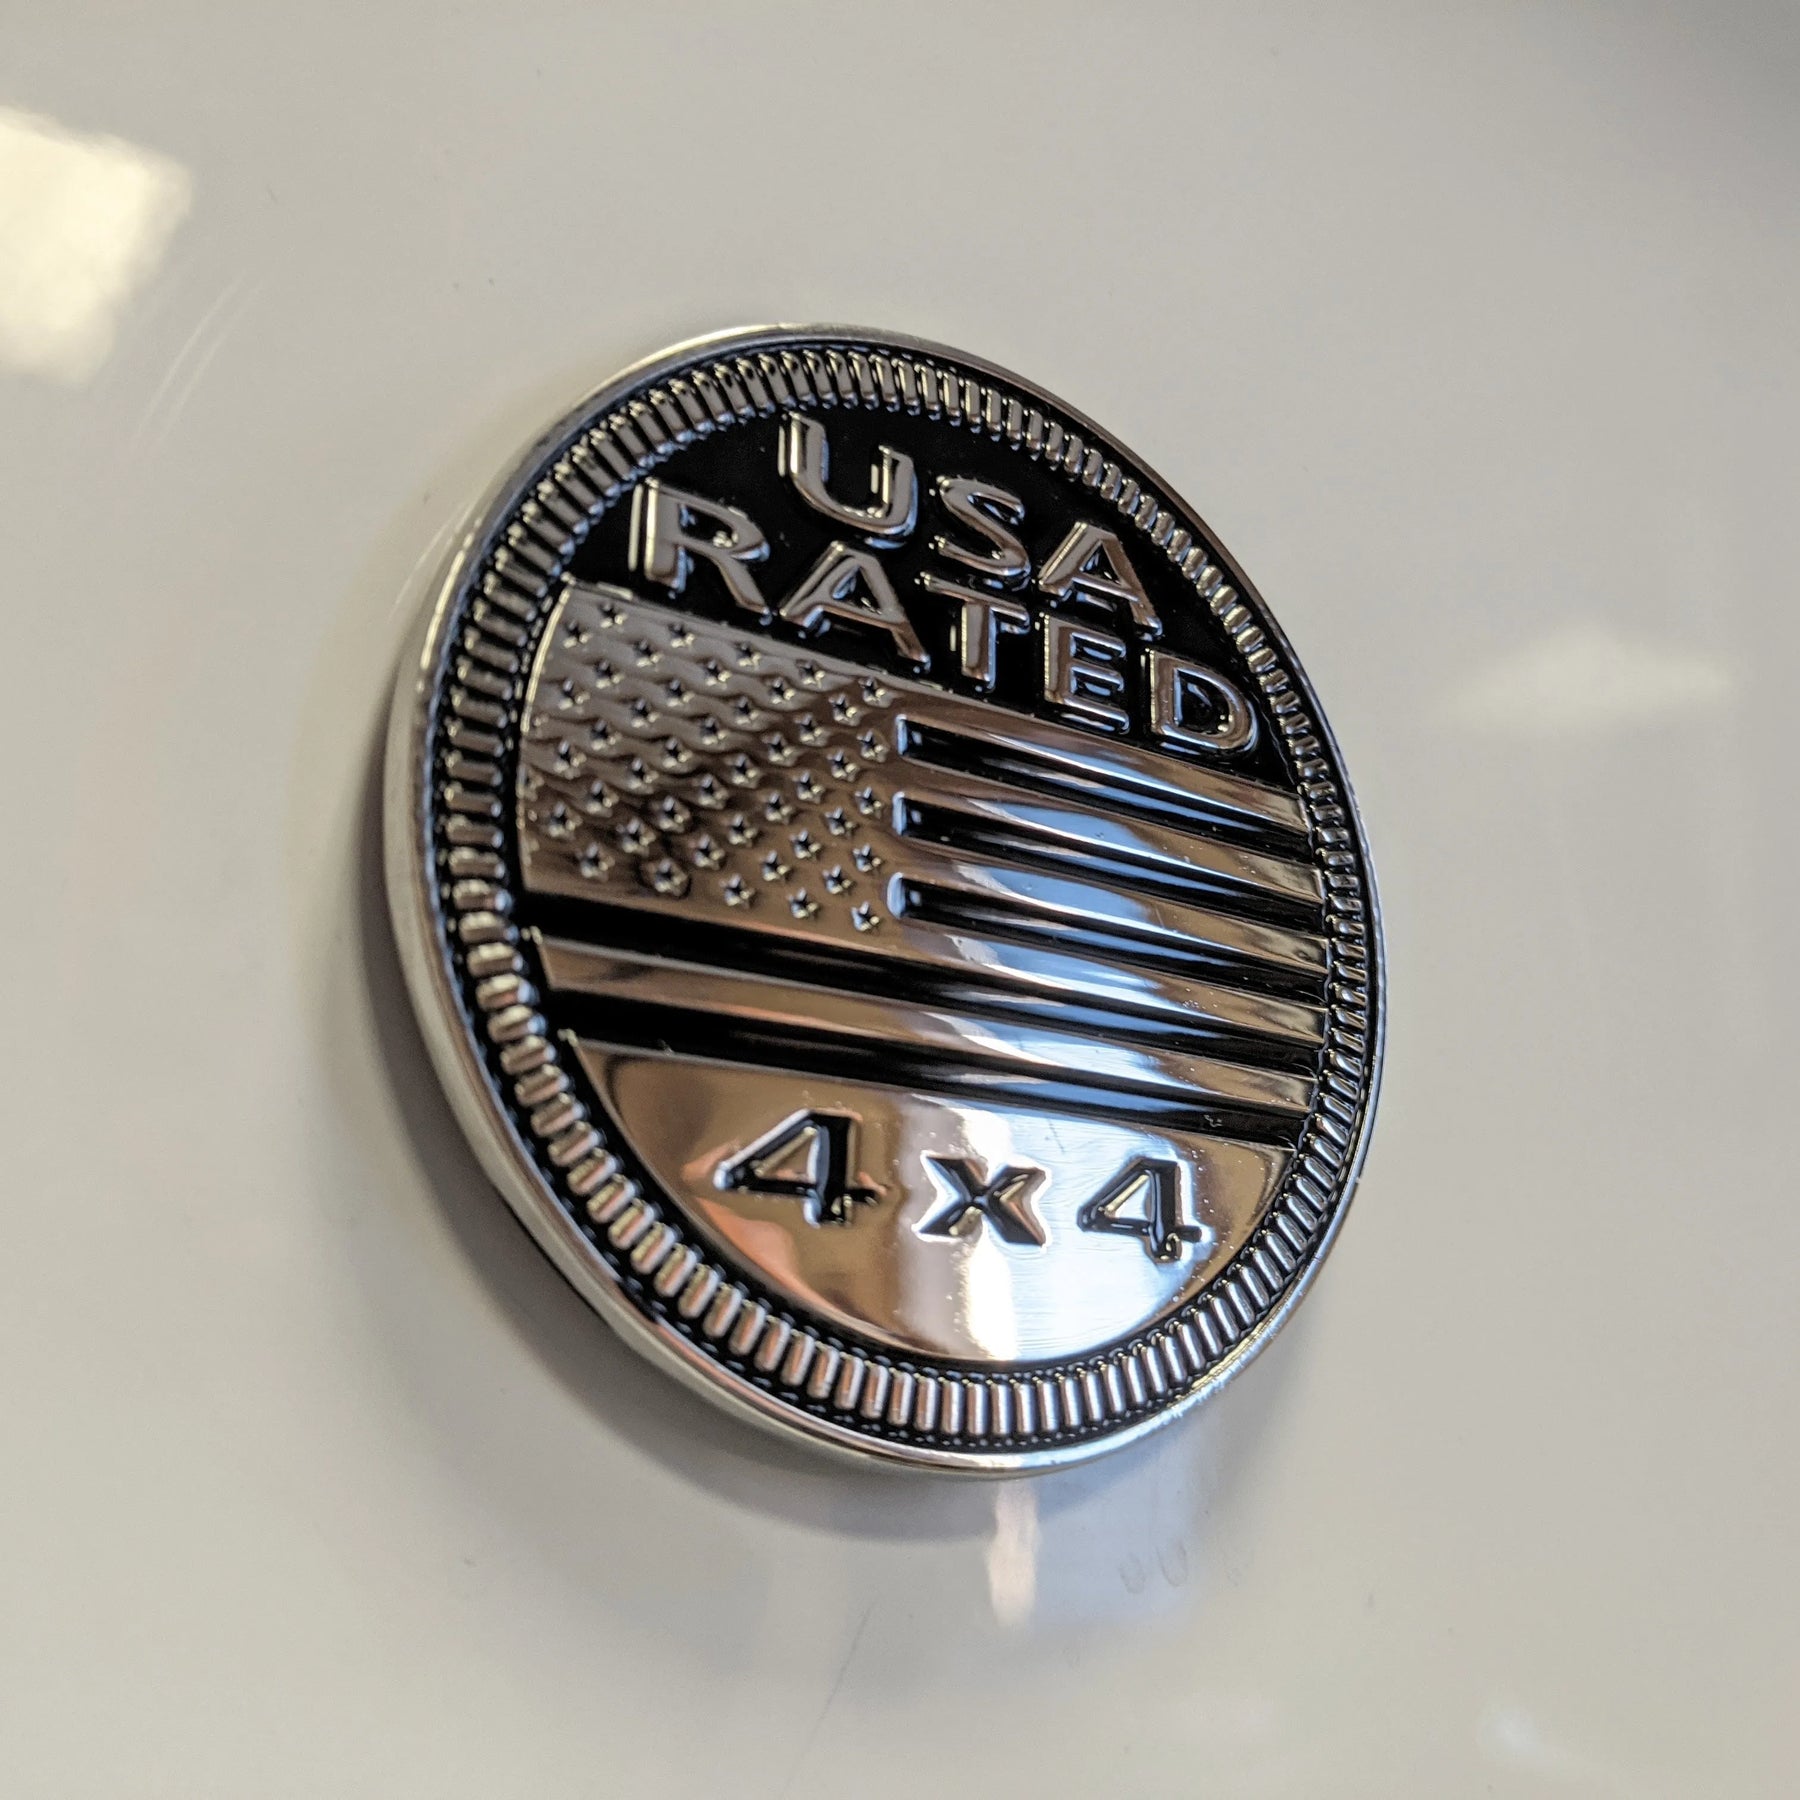  Rated Badge - Brushed Silver - Compatible with Jeep